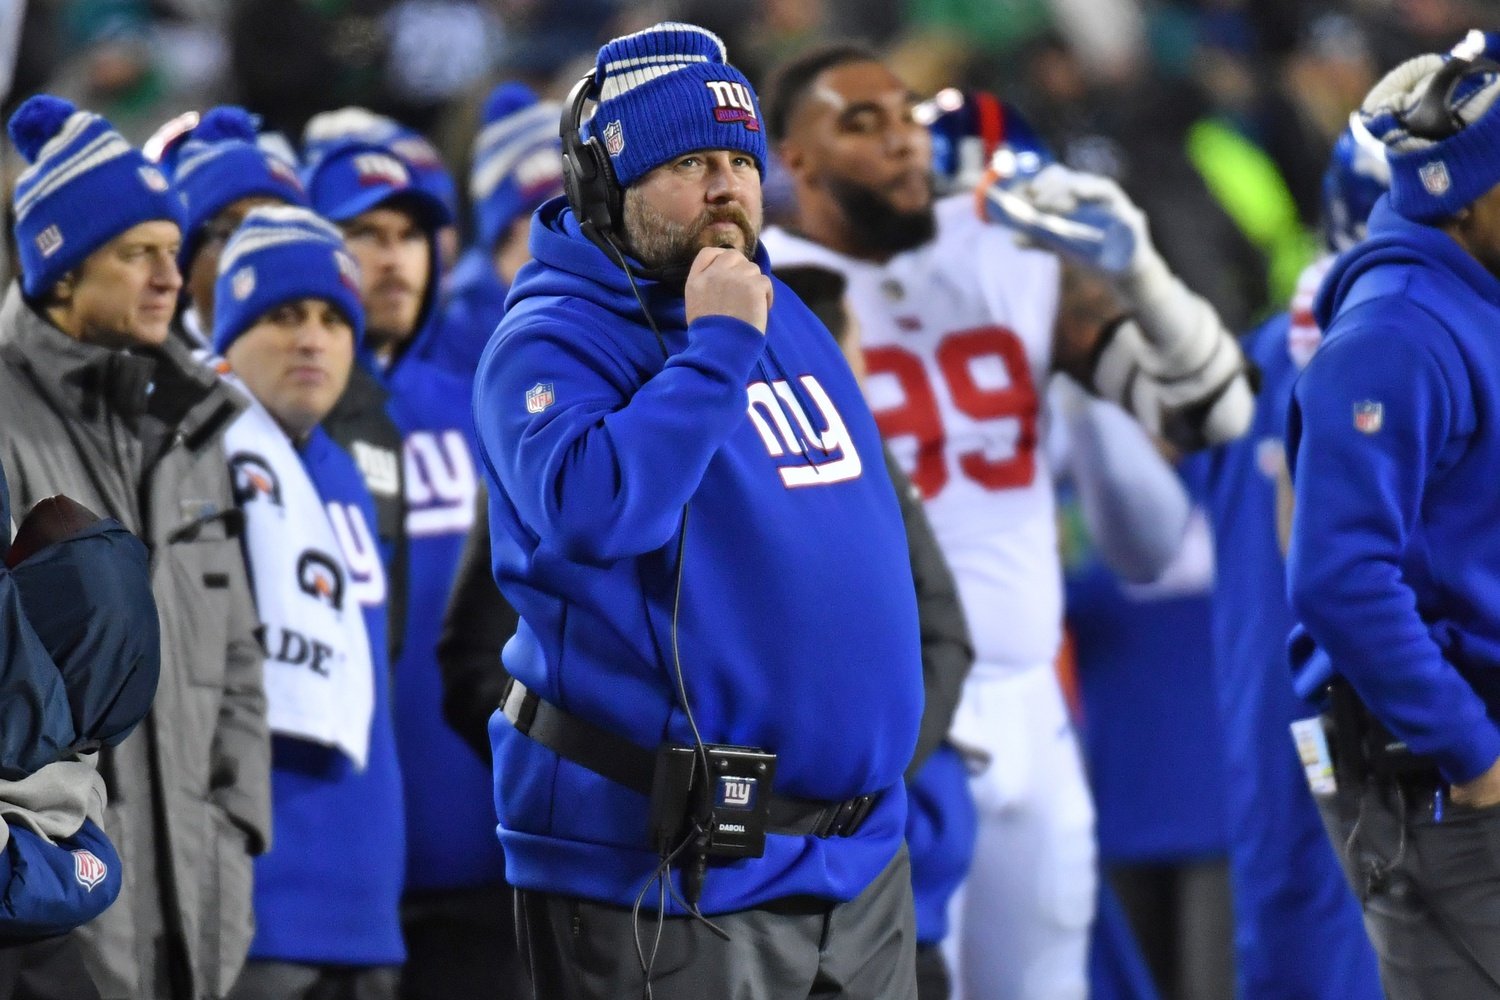 New York Giants Coaching Staff: Who Is on the Giants' Coaching Staff?